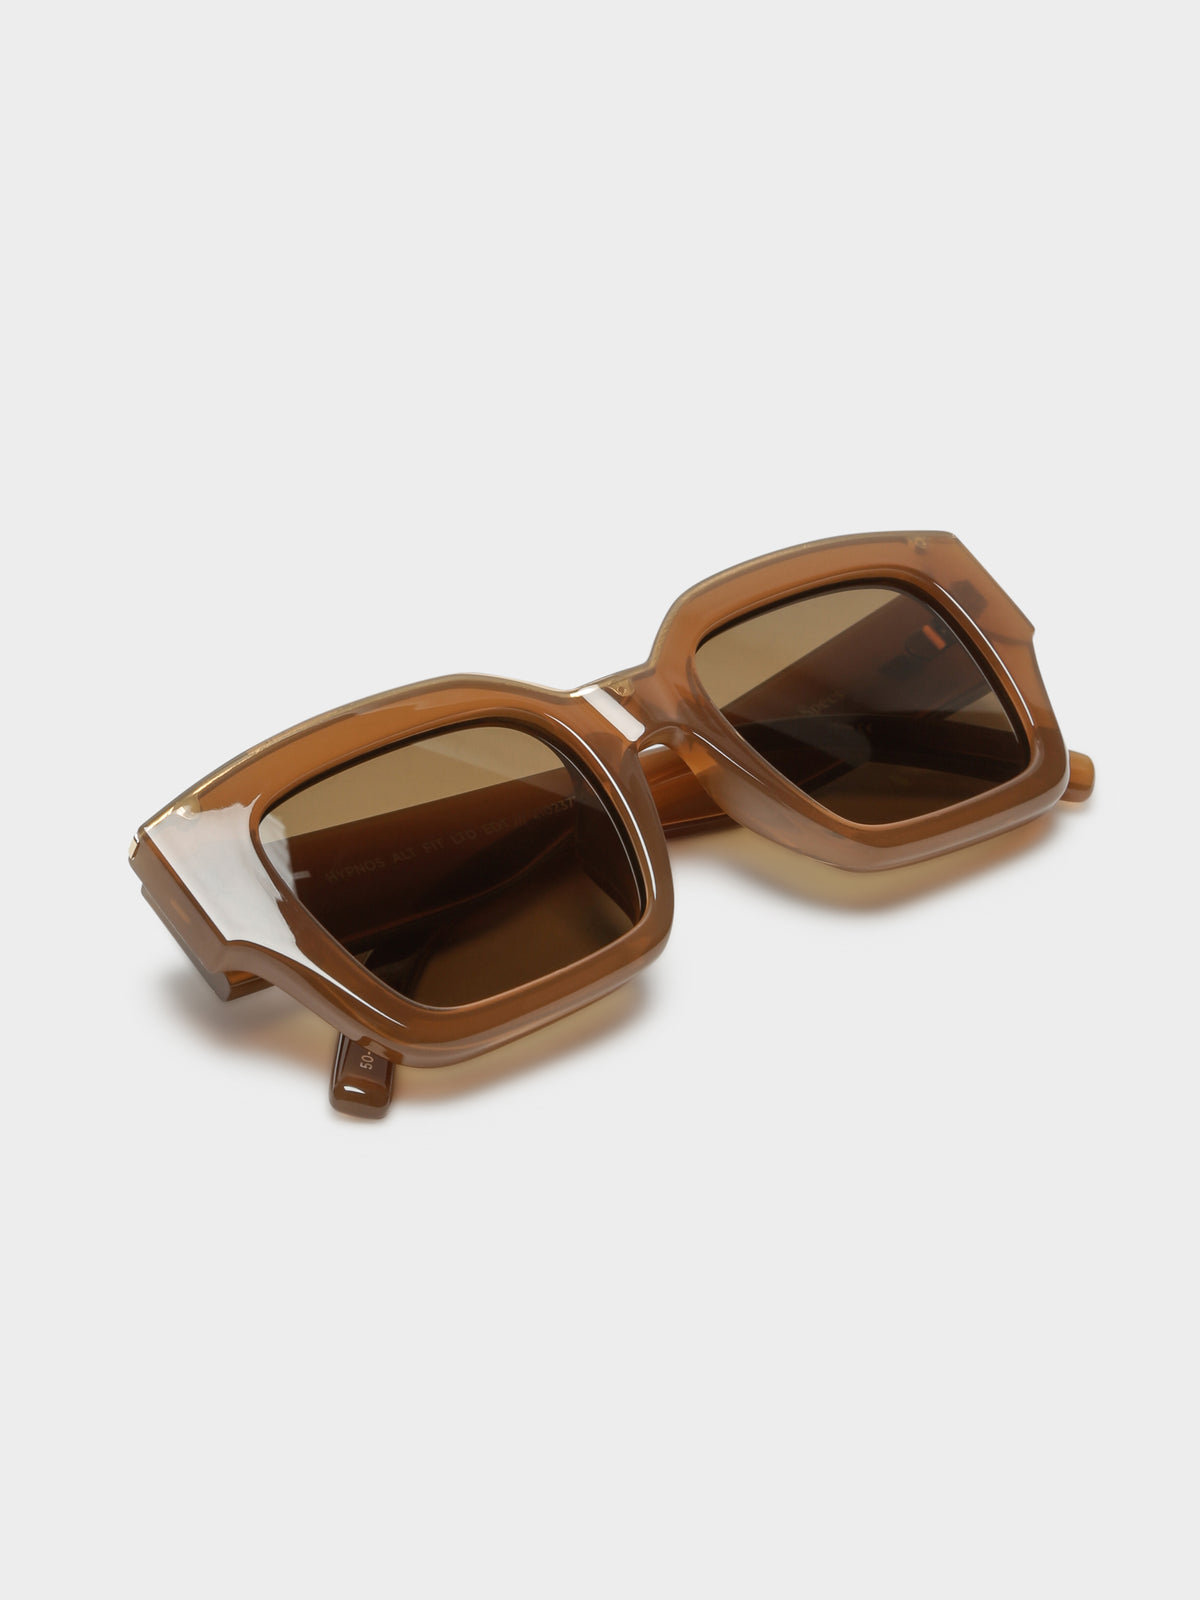 Hypnos Alt Fit Sunglasses in Rye